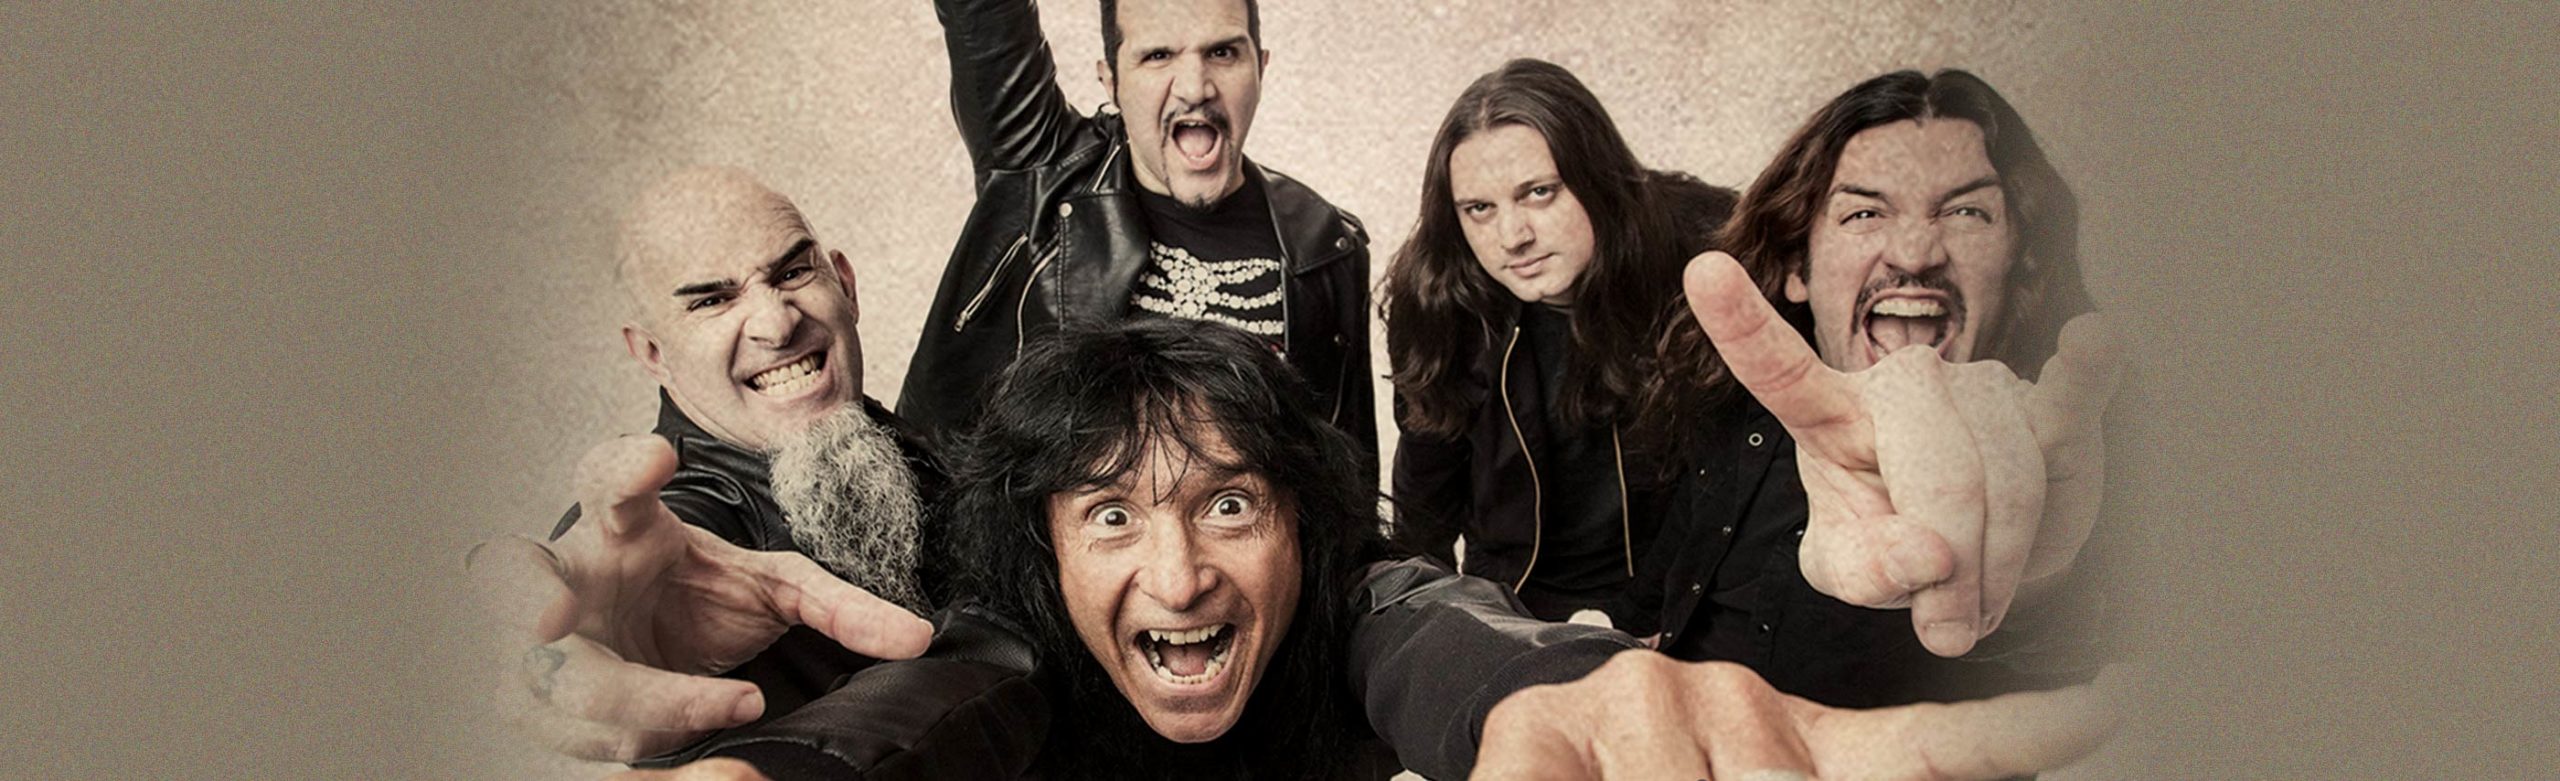 Event Info: Anthrax and Testament with Walking Corpse Syndrome at The Wilma Image